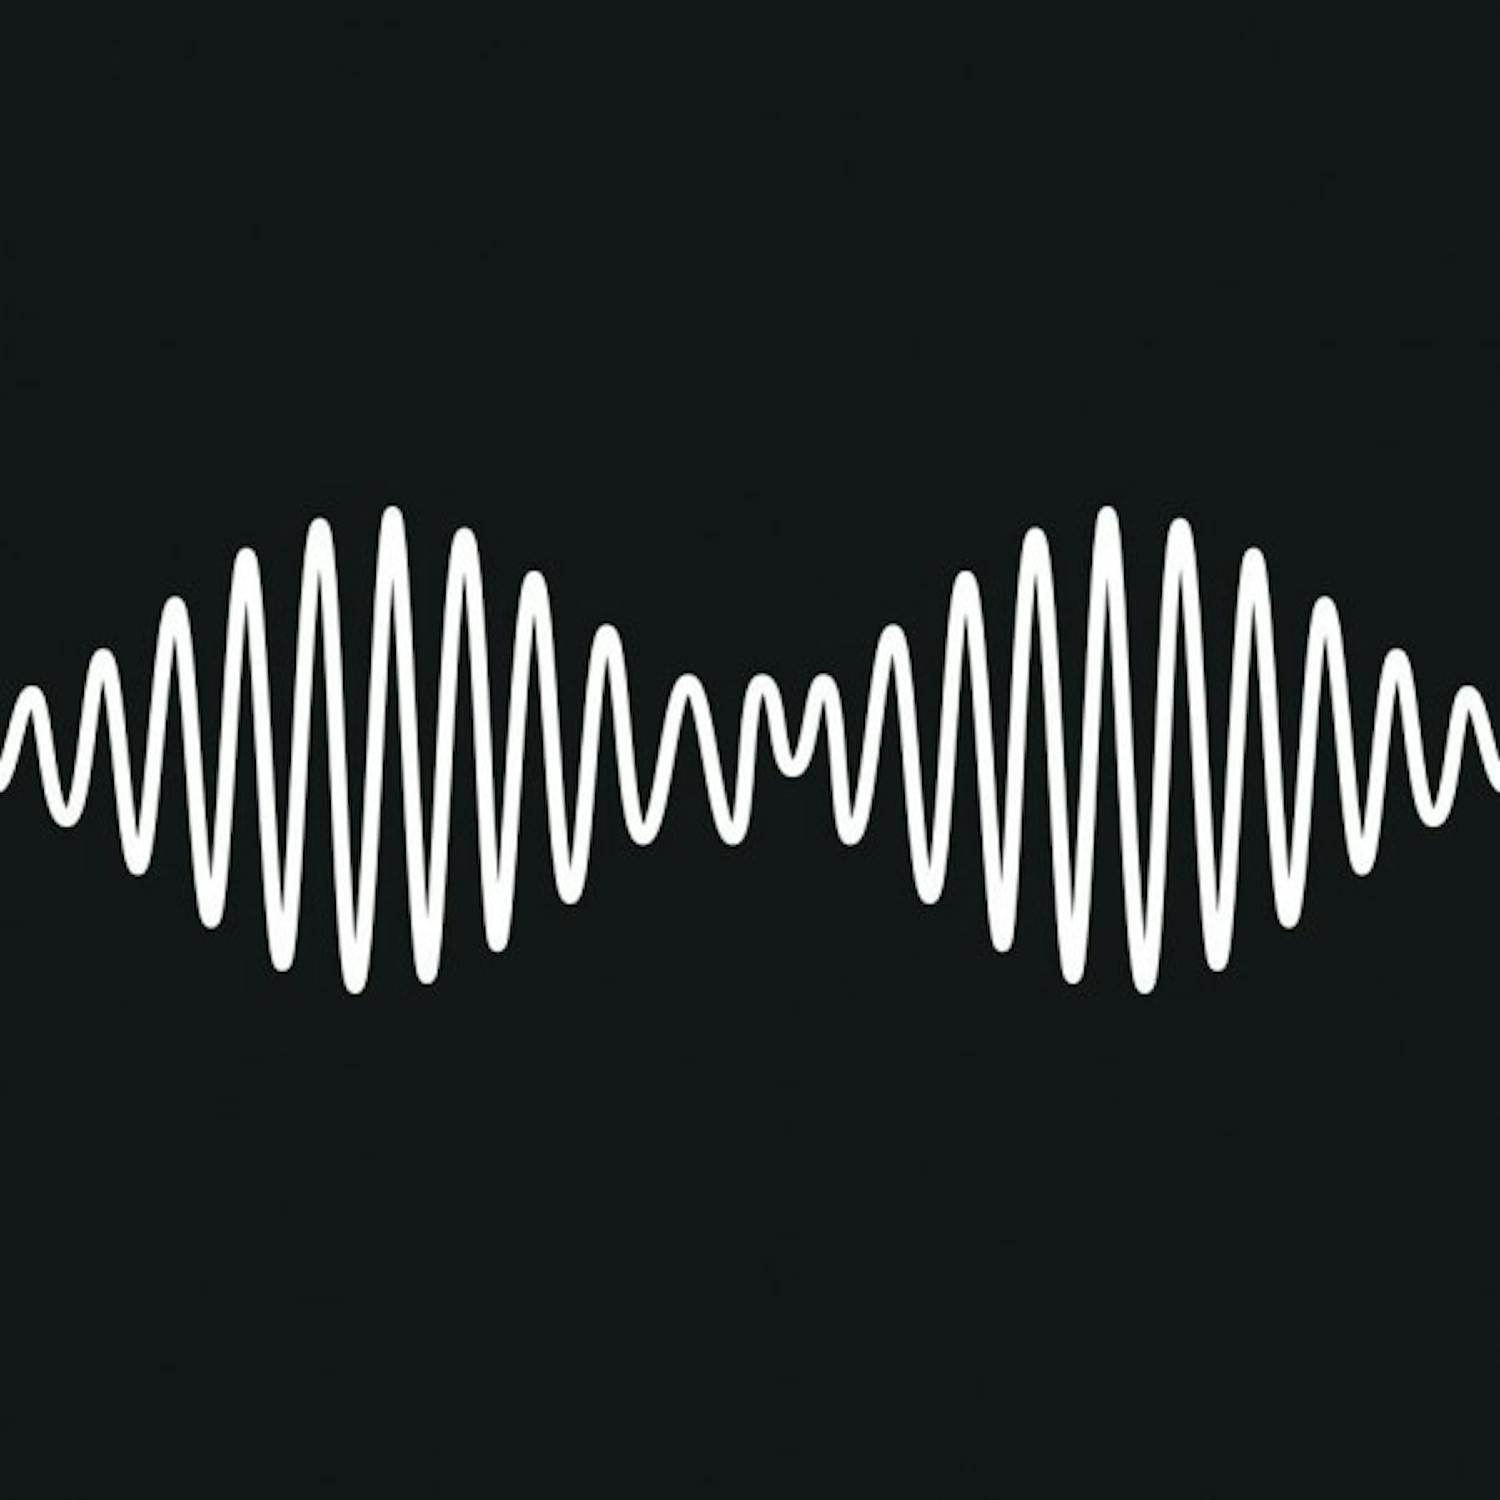 "AM" by Arctic Monkeys was released in 2013. Along with several other artists, Arctic Monkeys is expected to release a new album this year.